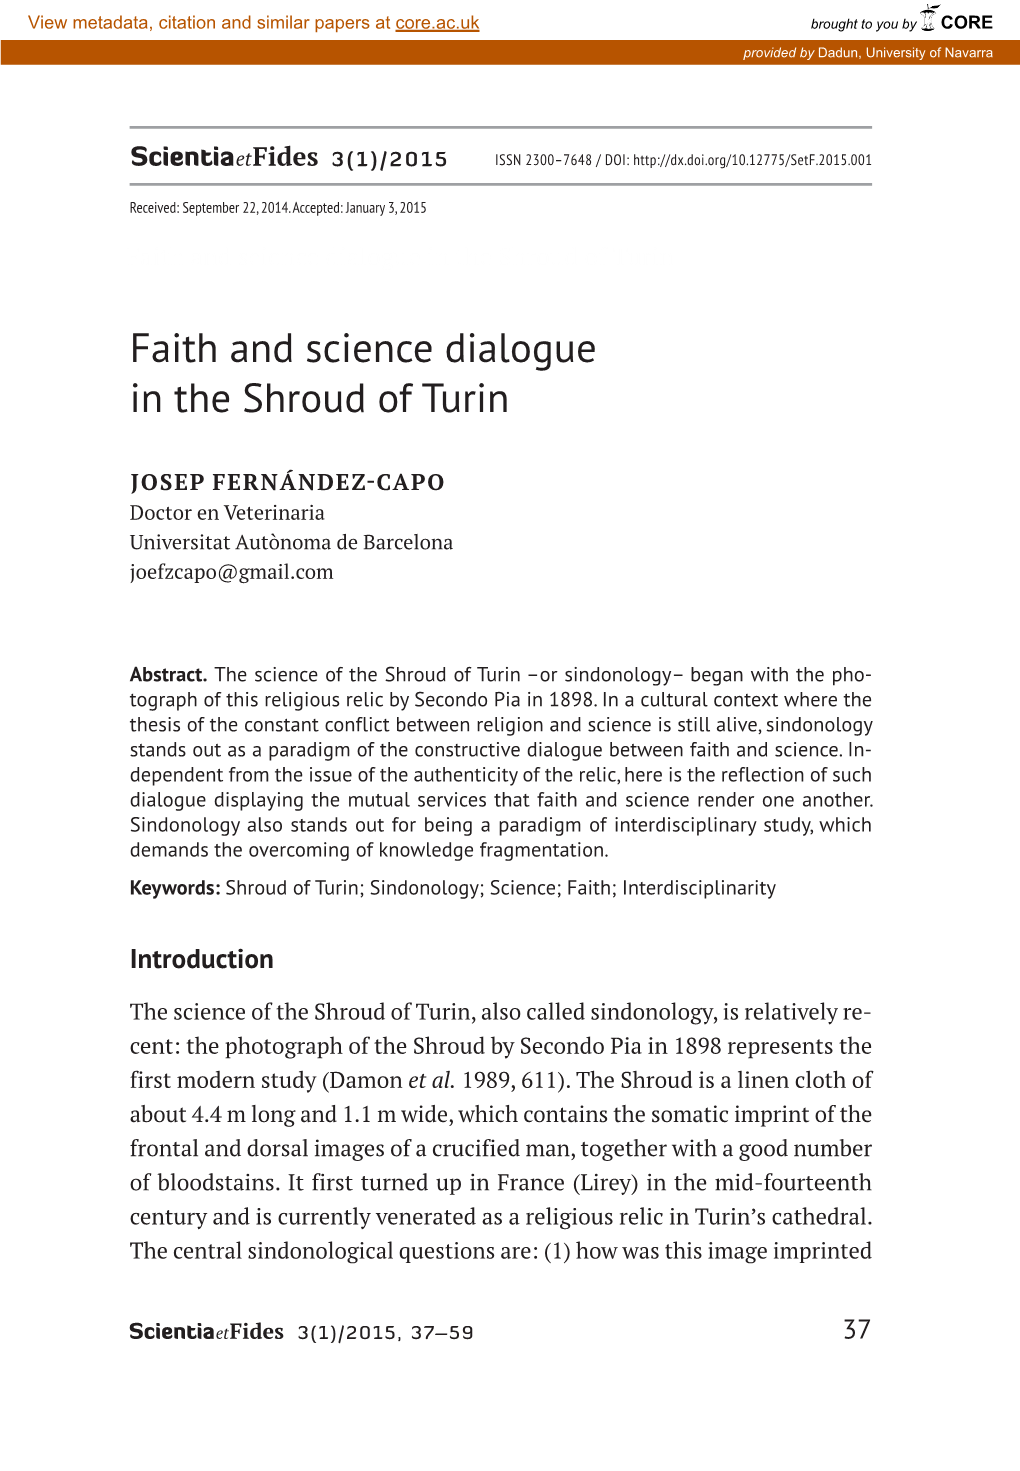 Faith and Science Dialogue in the Shroud of Turin